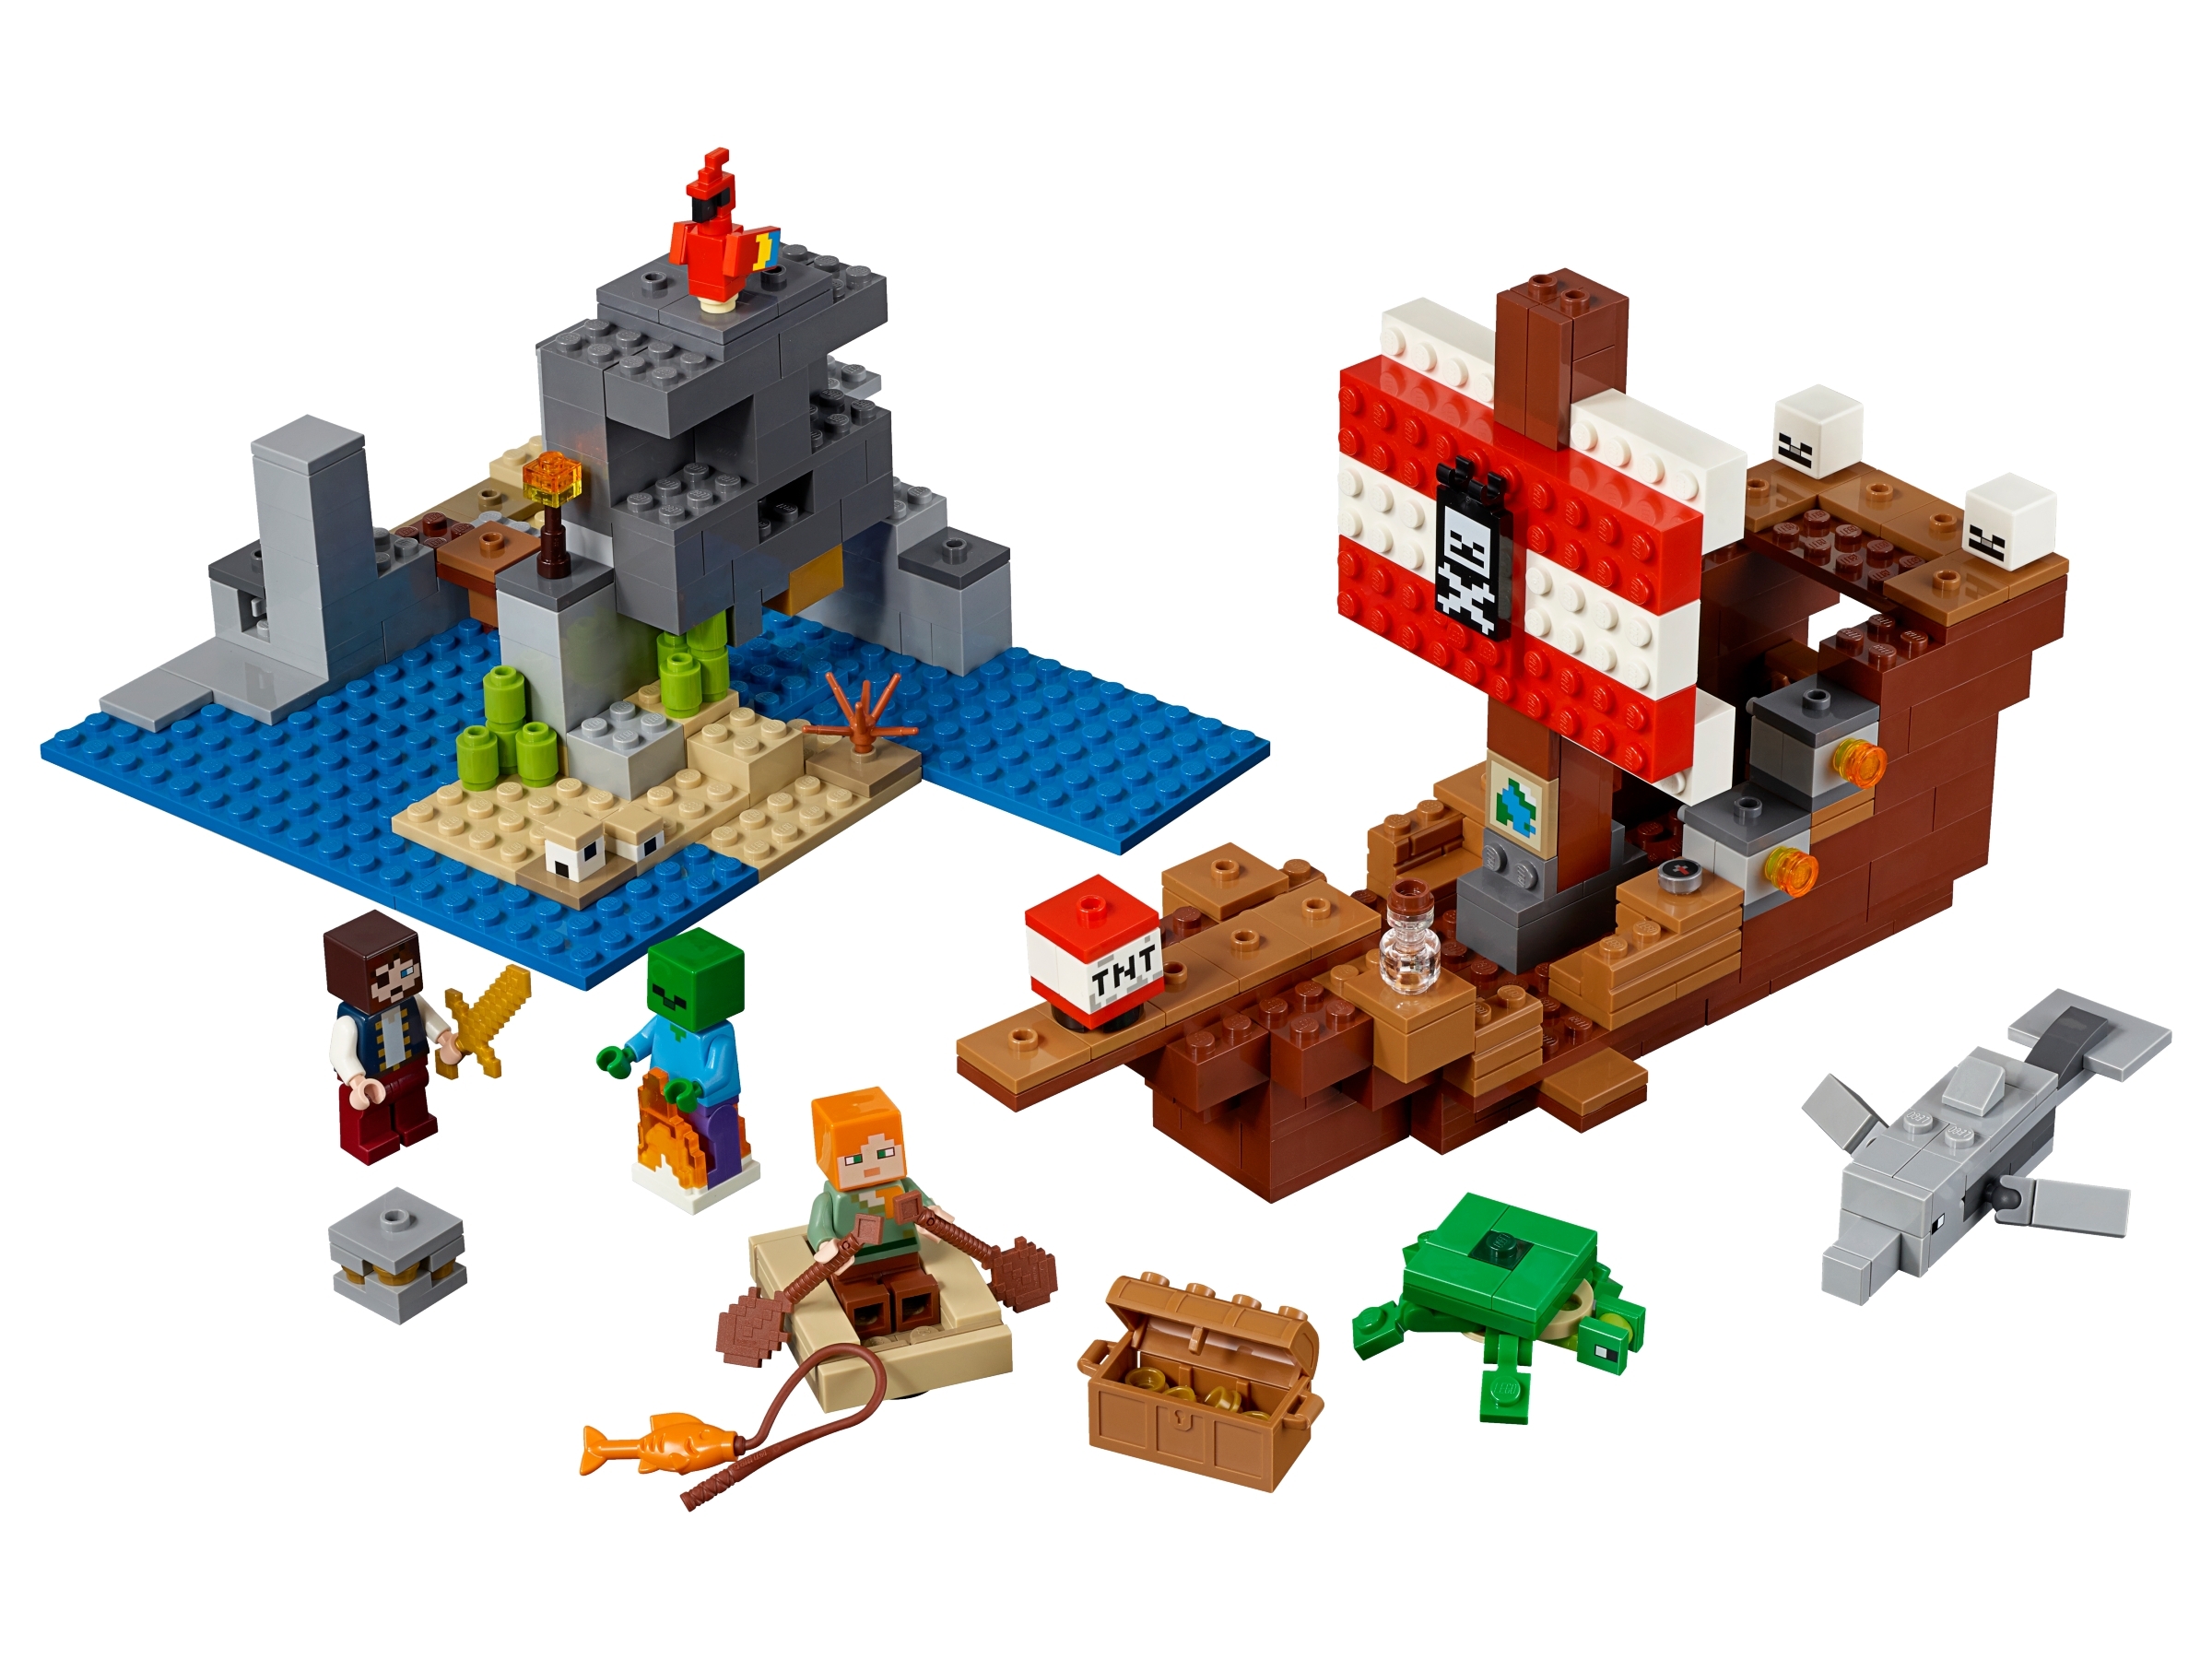 The Pirate Ship Adventure 21152 Minecraft Buy Online At The